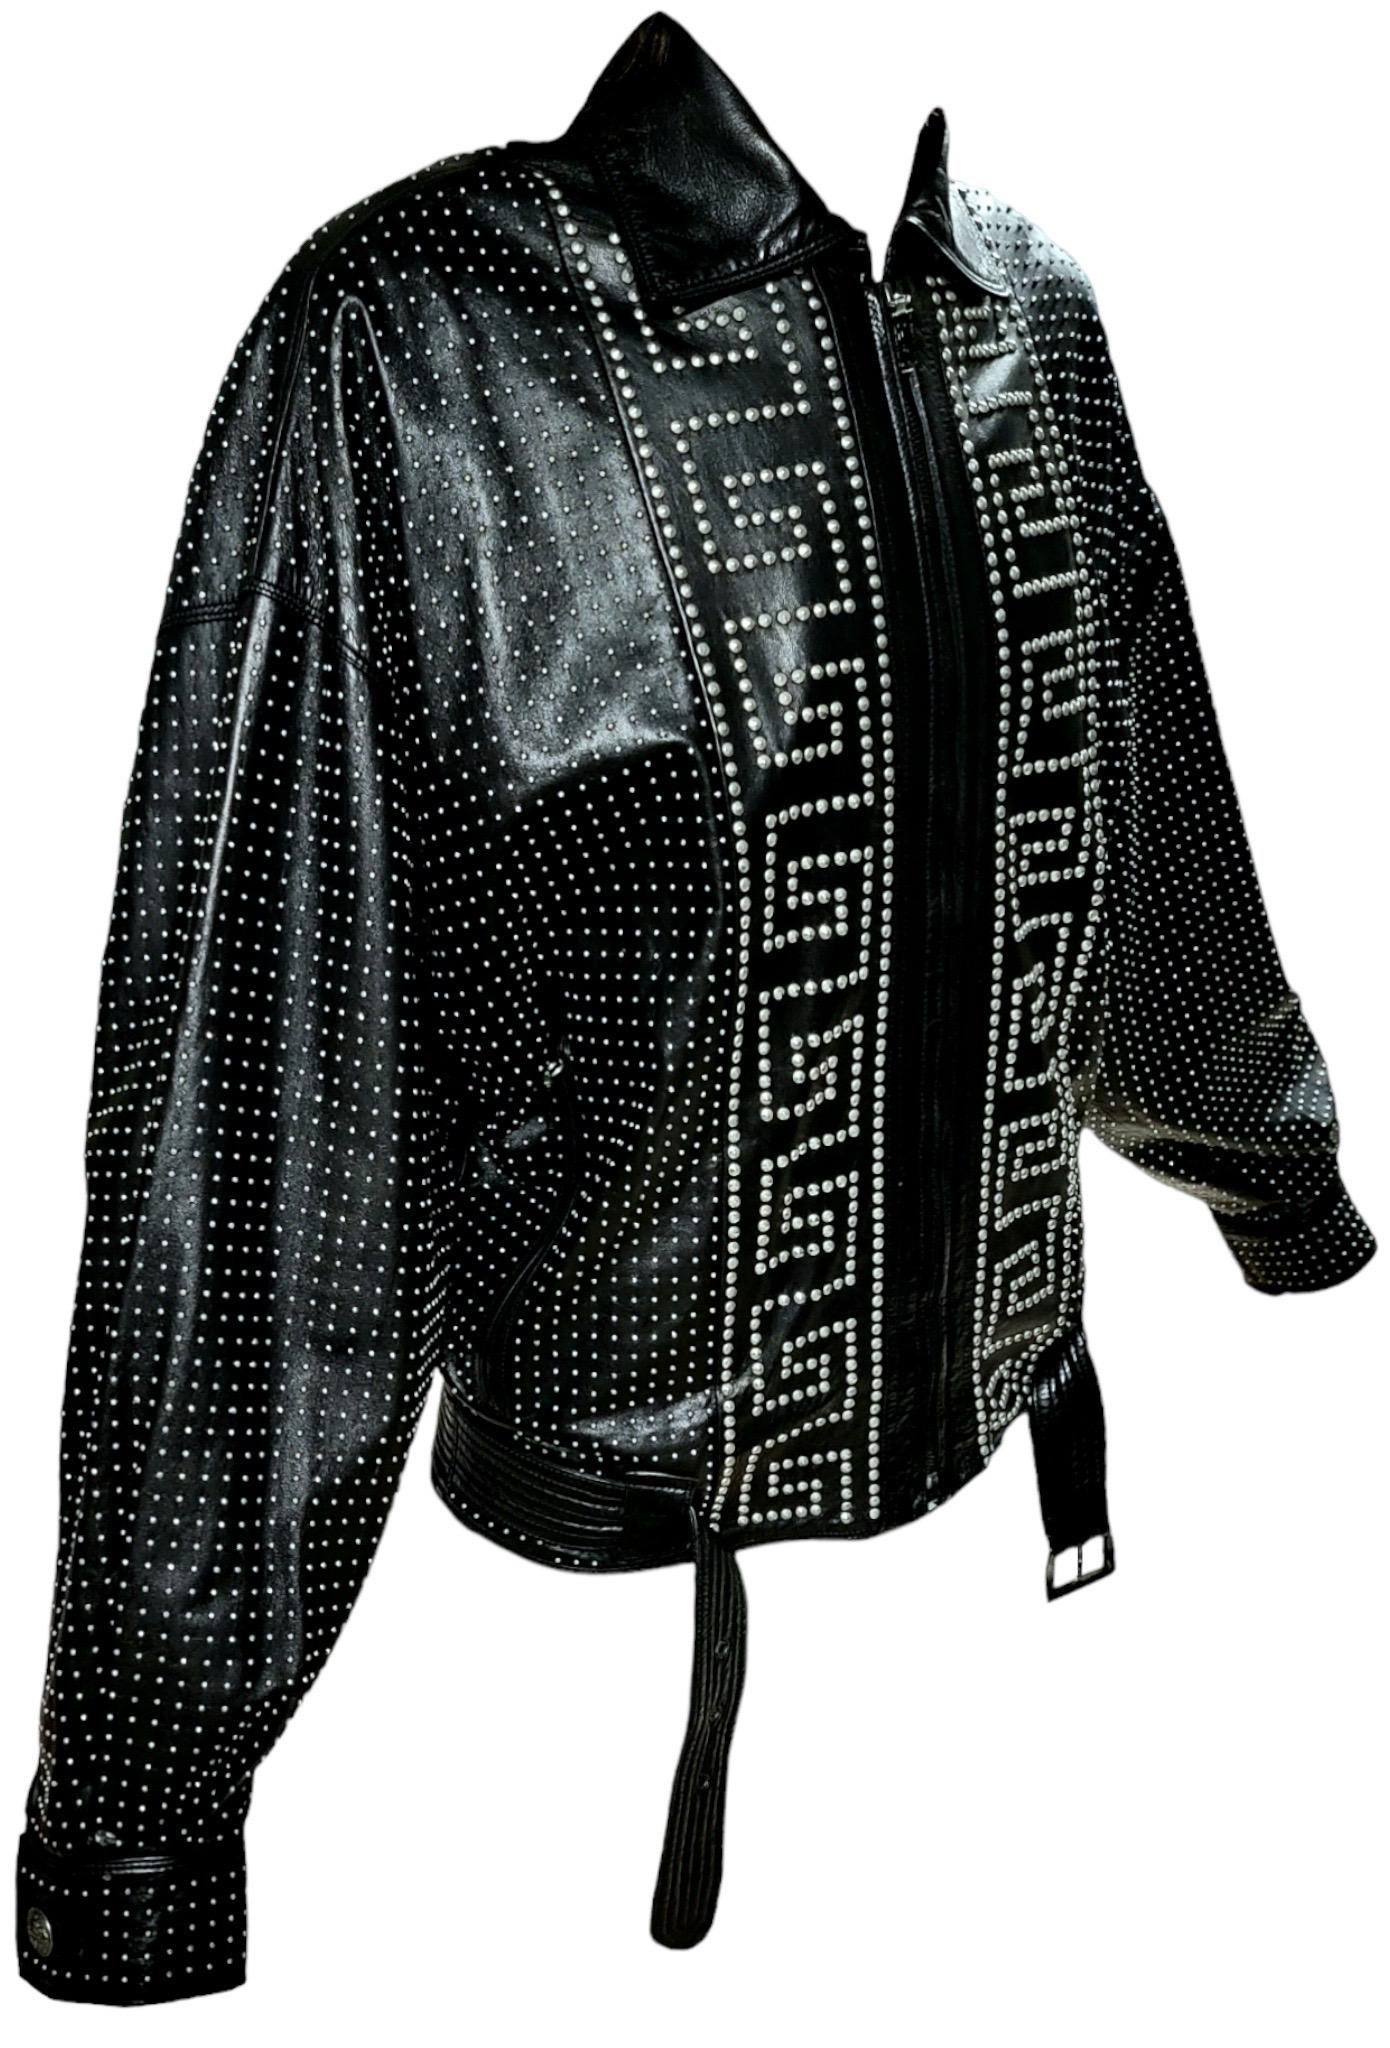 S/S 1992 Gianni Versace Greek Key Studded Leather Jacket For Sale 3